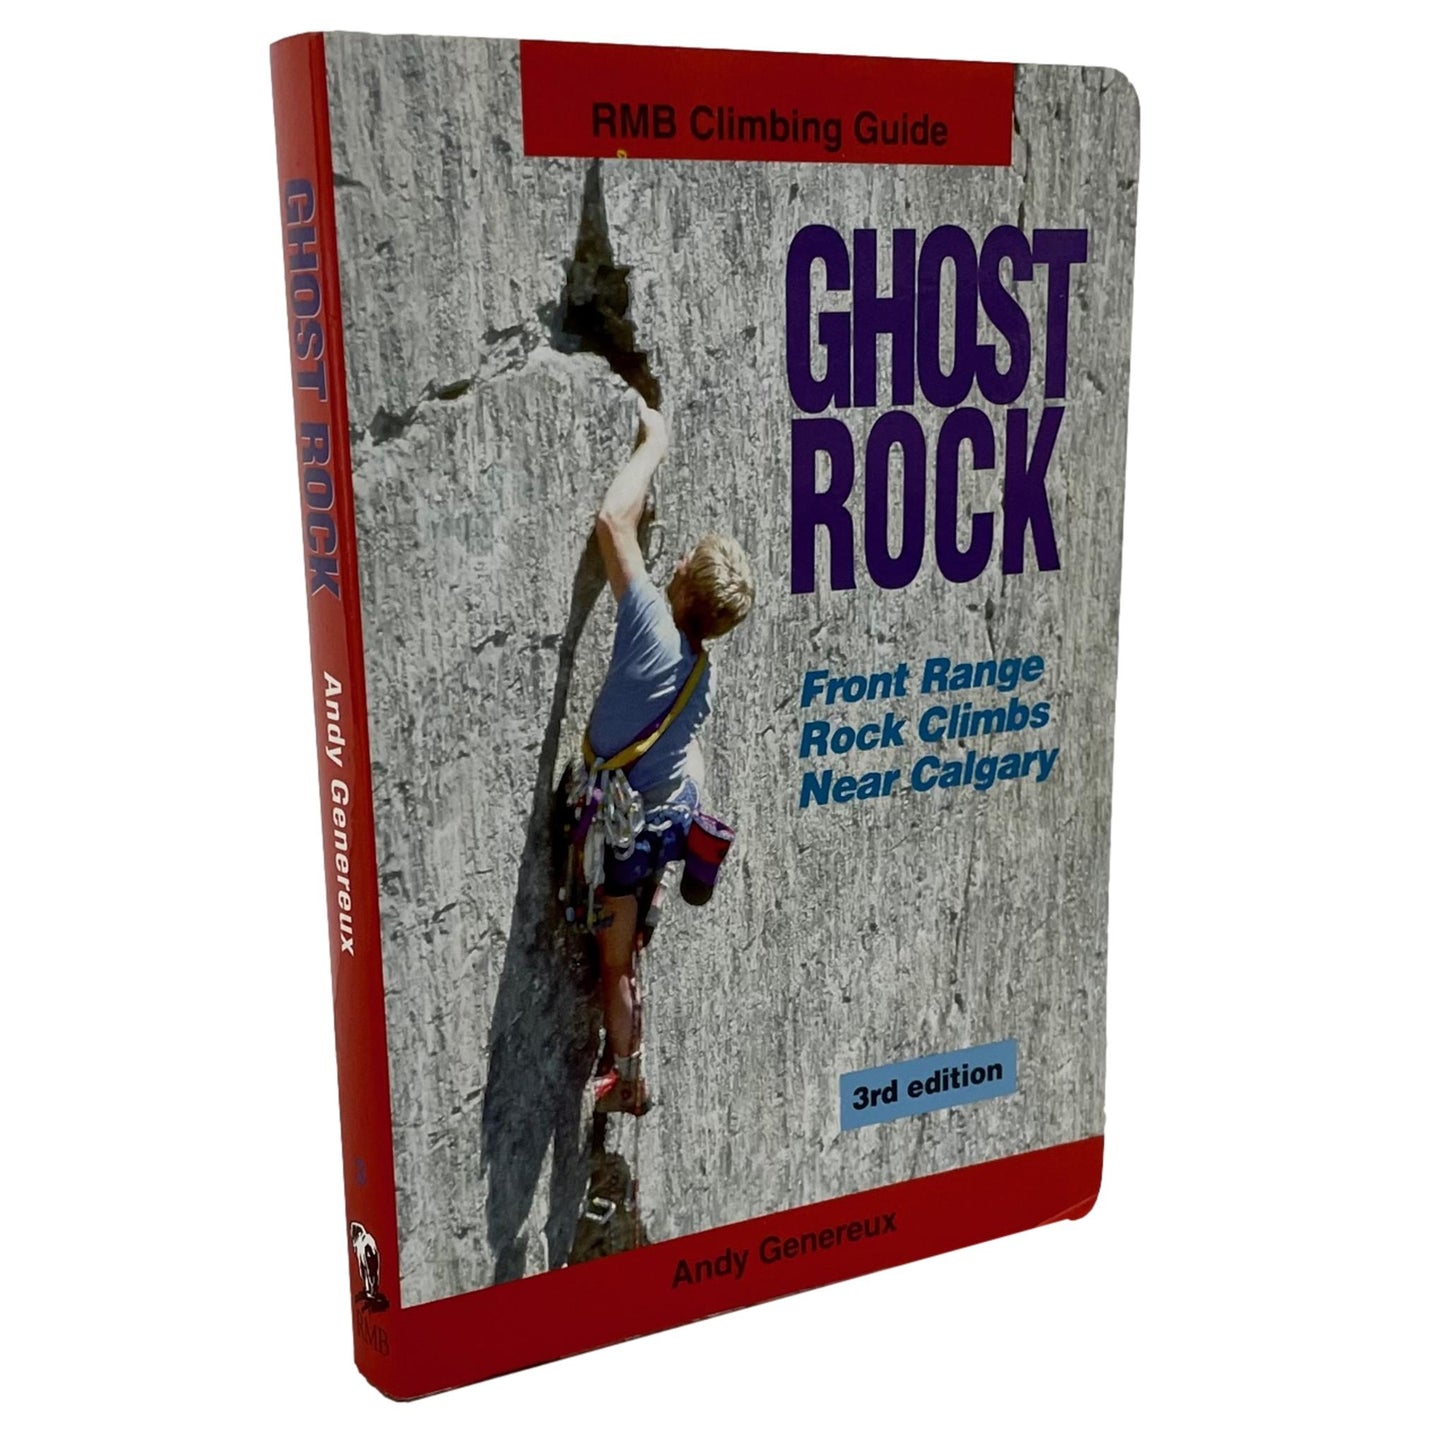 Ghost Rock Canadian Rockies Banff Climbing Mountaineering Used Book